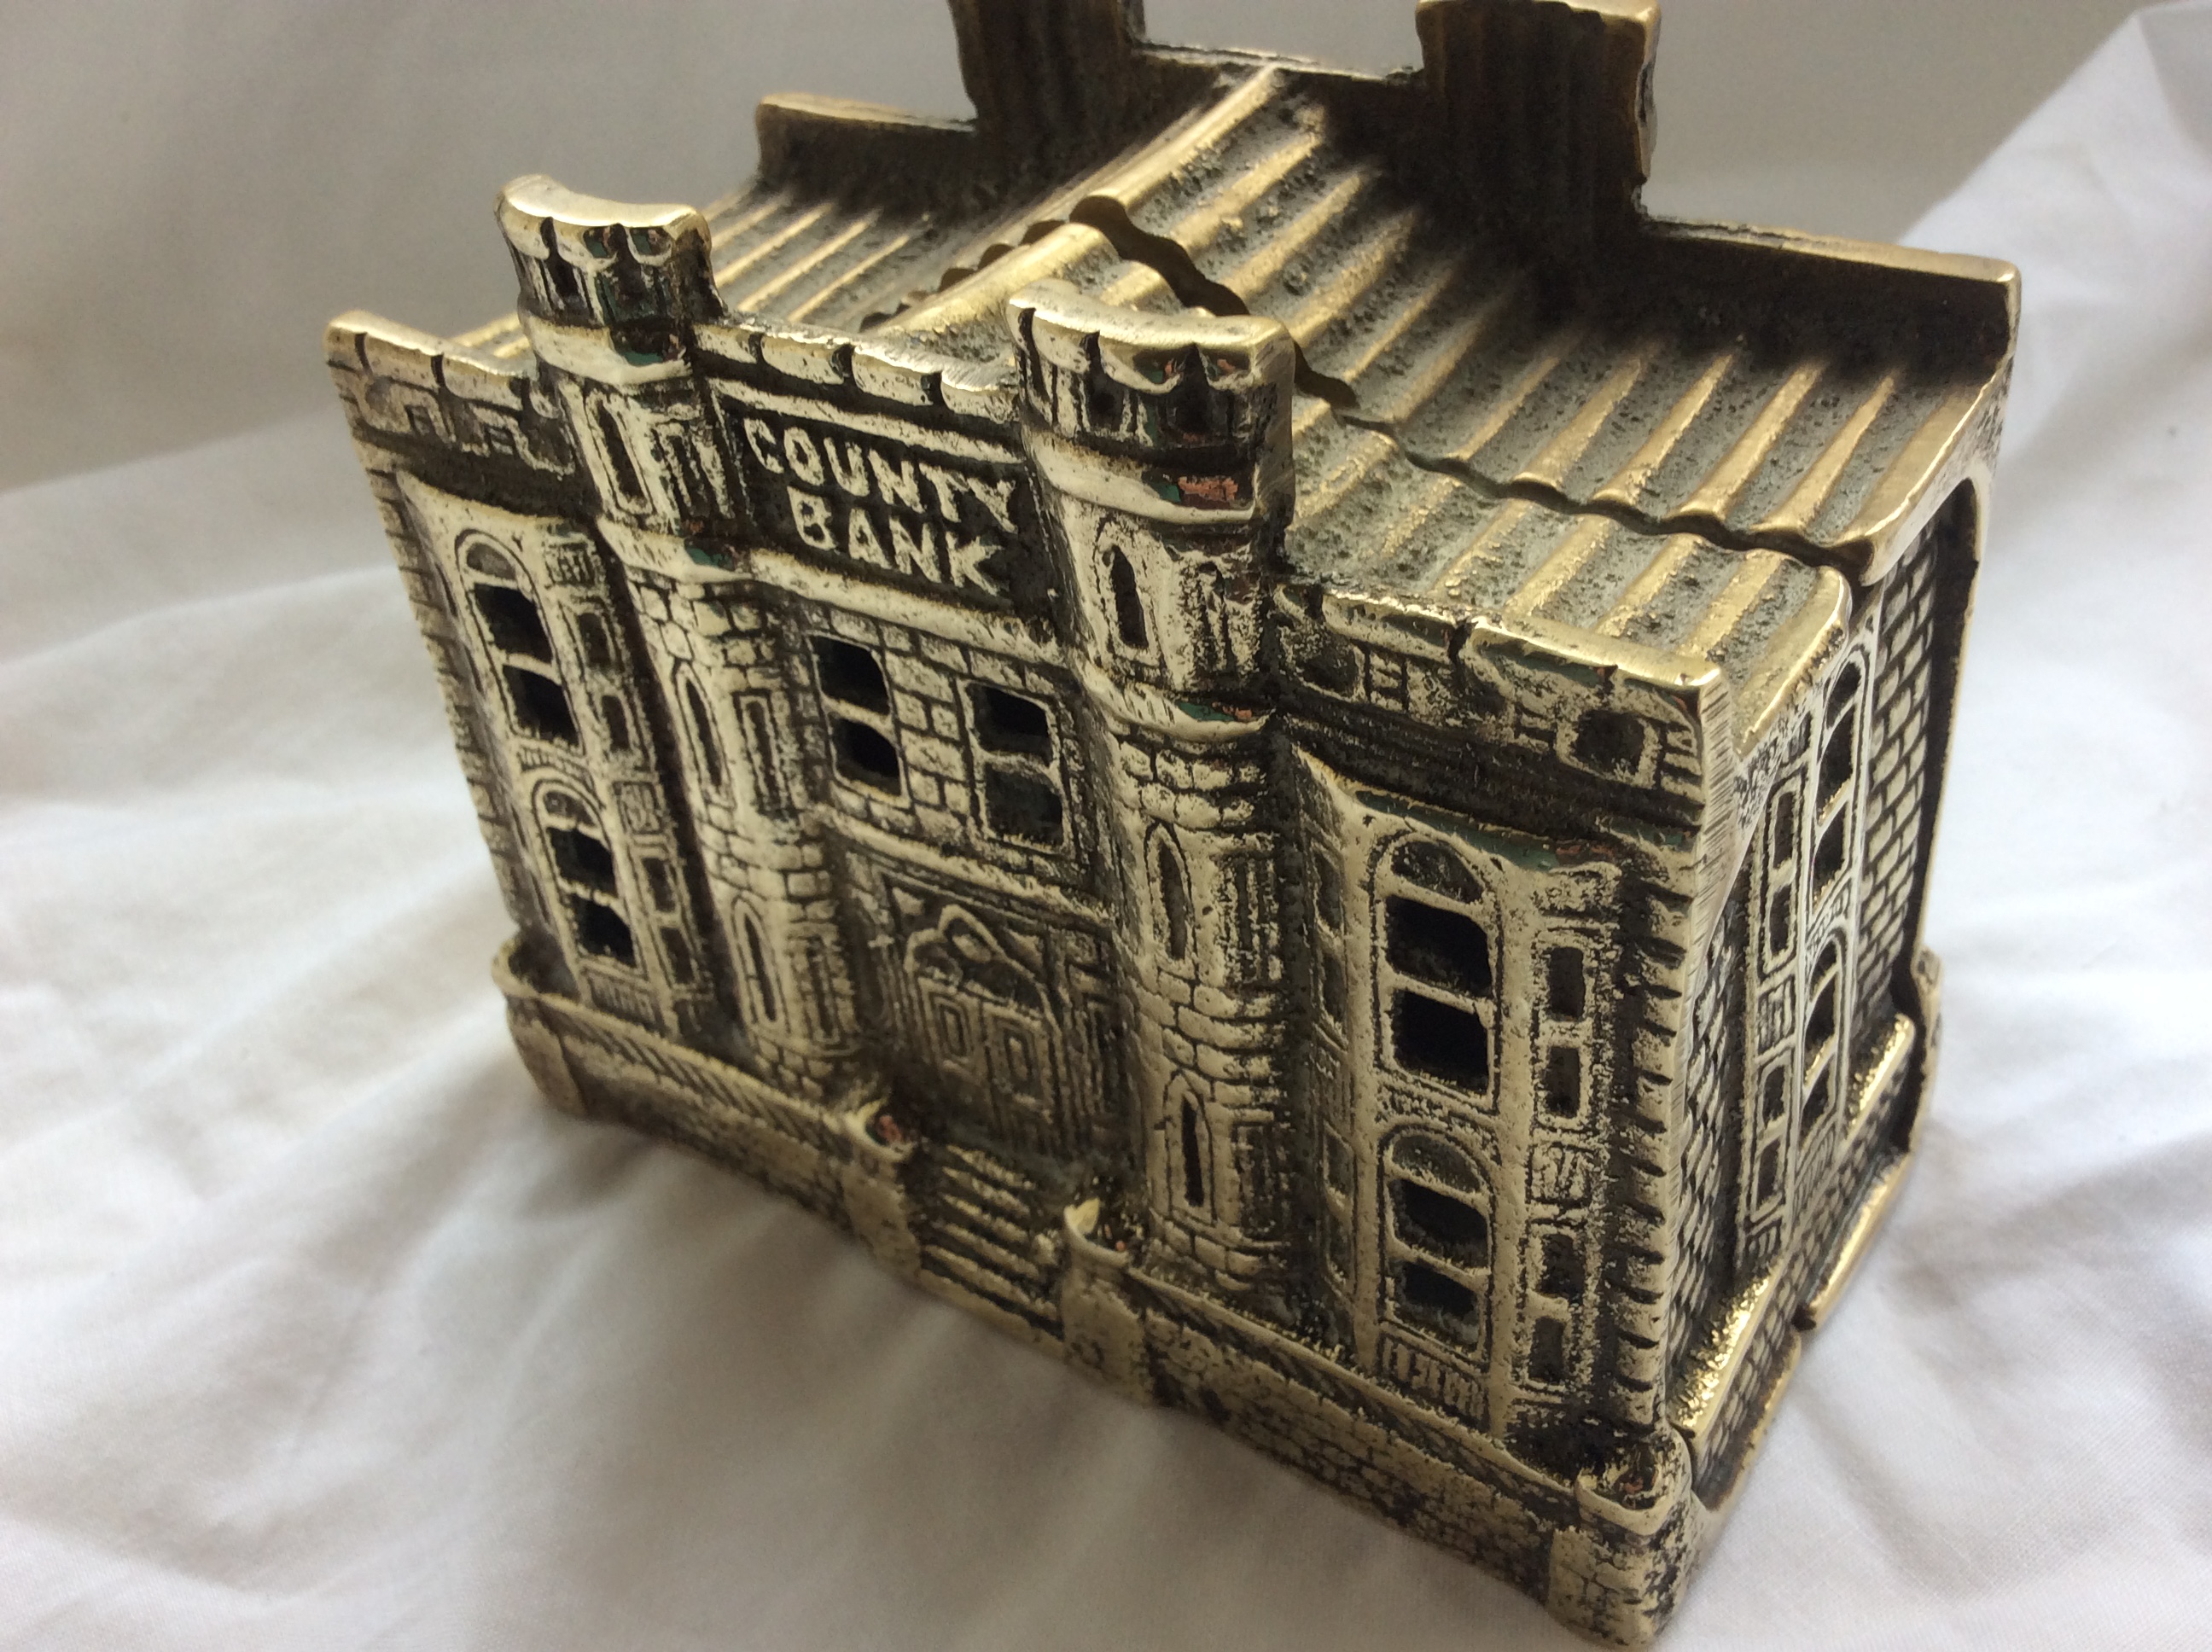 Antique Brass County Bank Money Box - Image 3 of 6